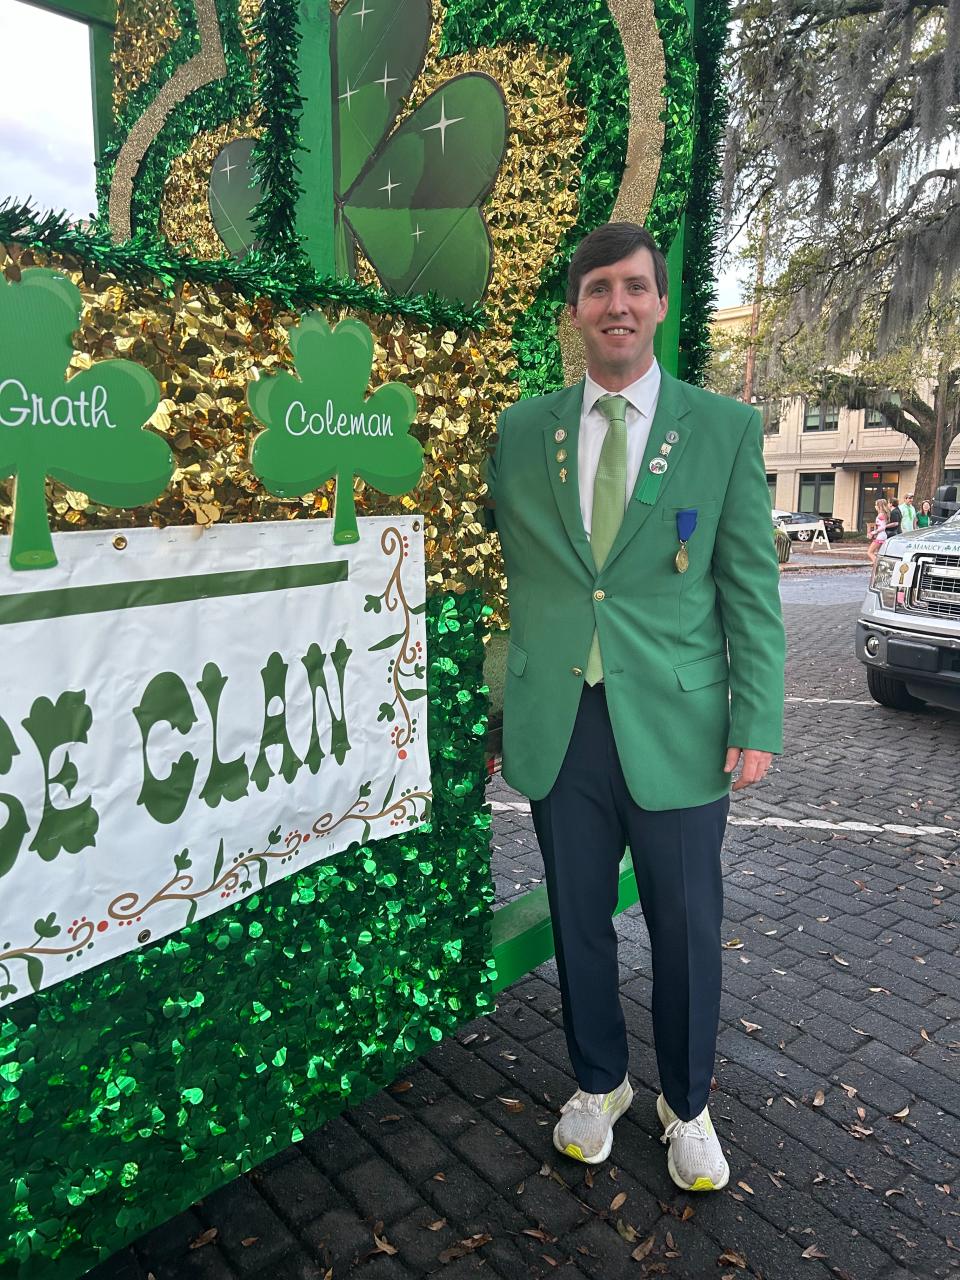 For nearly four decades, the Coleman and Shearhouse family has marched in the St. Patty’s Day Parade. It’s an emotional day for Joe Shearhouse as he recollects riding horses in the parade as a youngster.